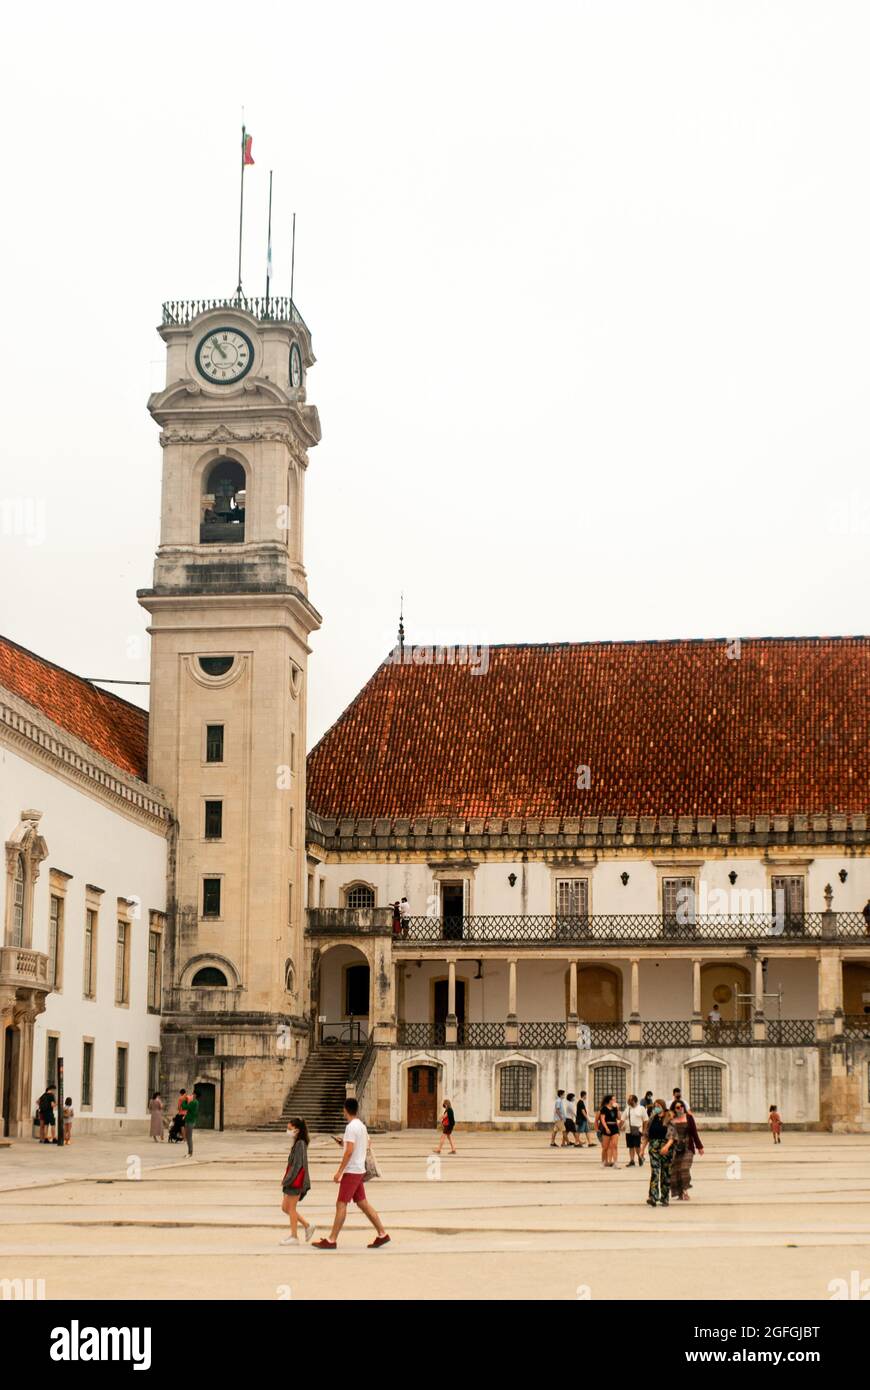 Tower of the Coimbra University and the tourists walking around the square cloudy morning - Portugal, Vertical, August 2021 Stock Photo